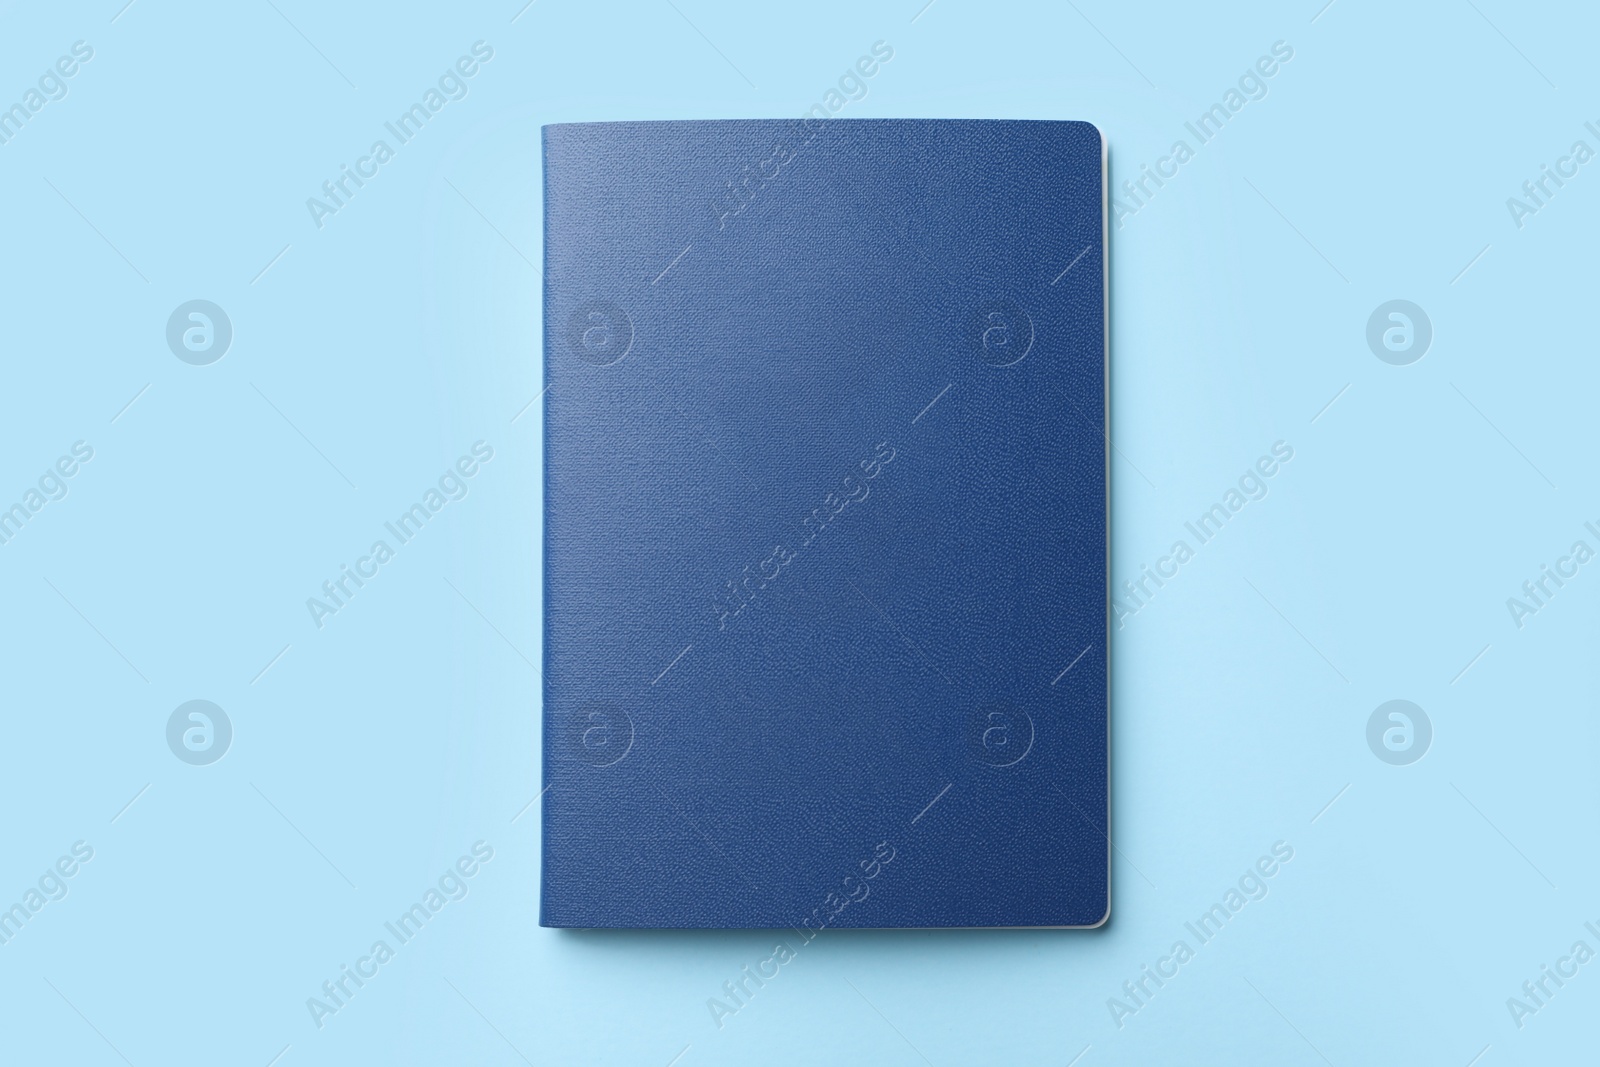 Photo of Blank passport on light blue background, top view